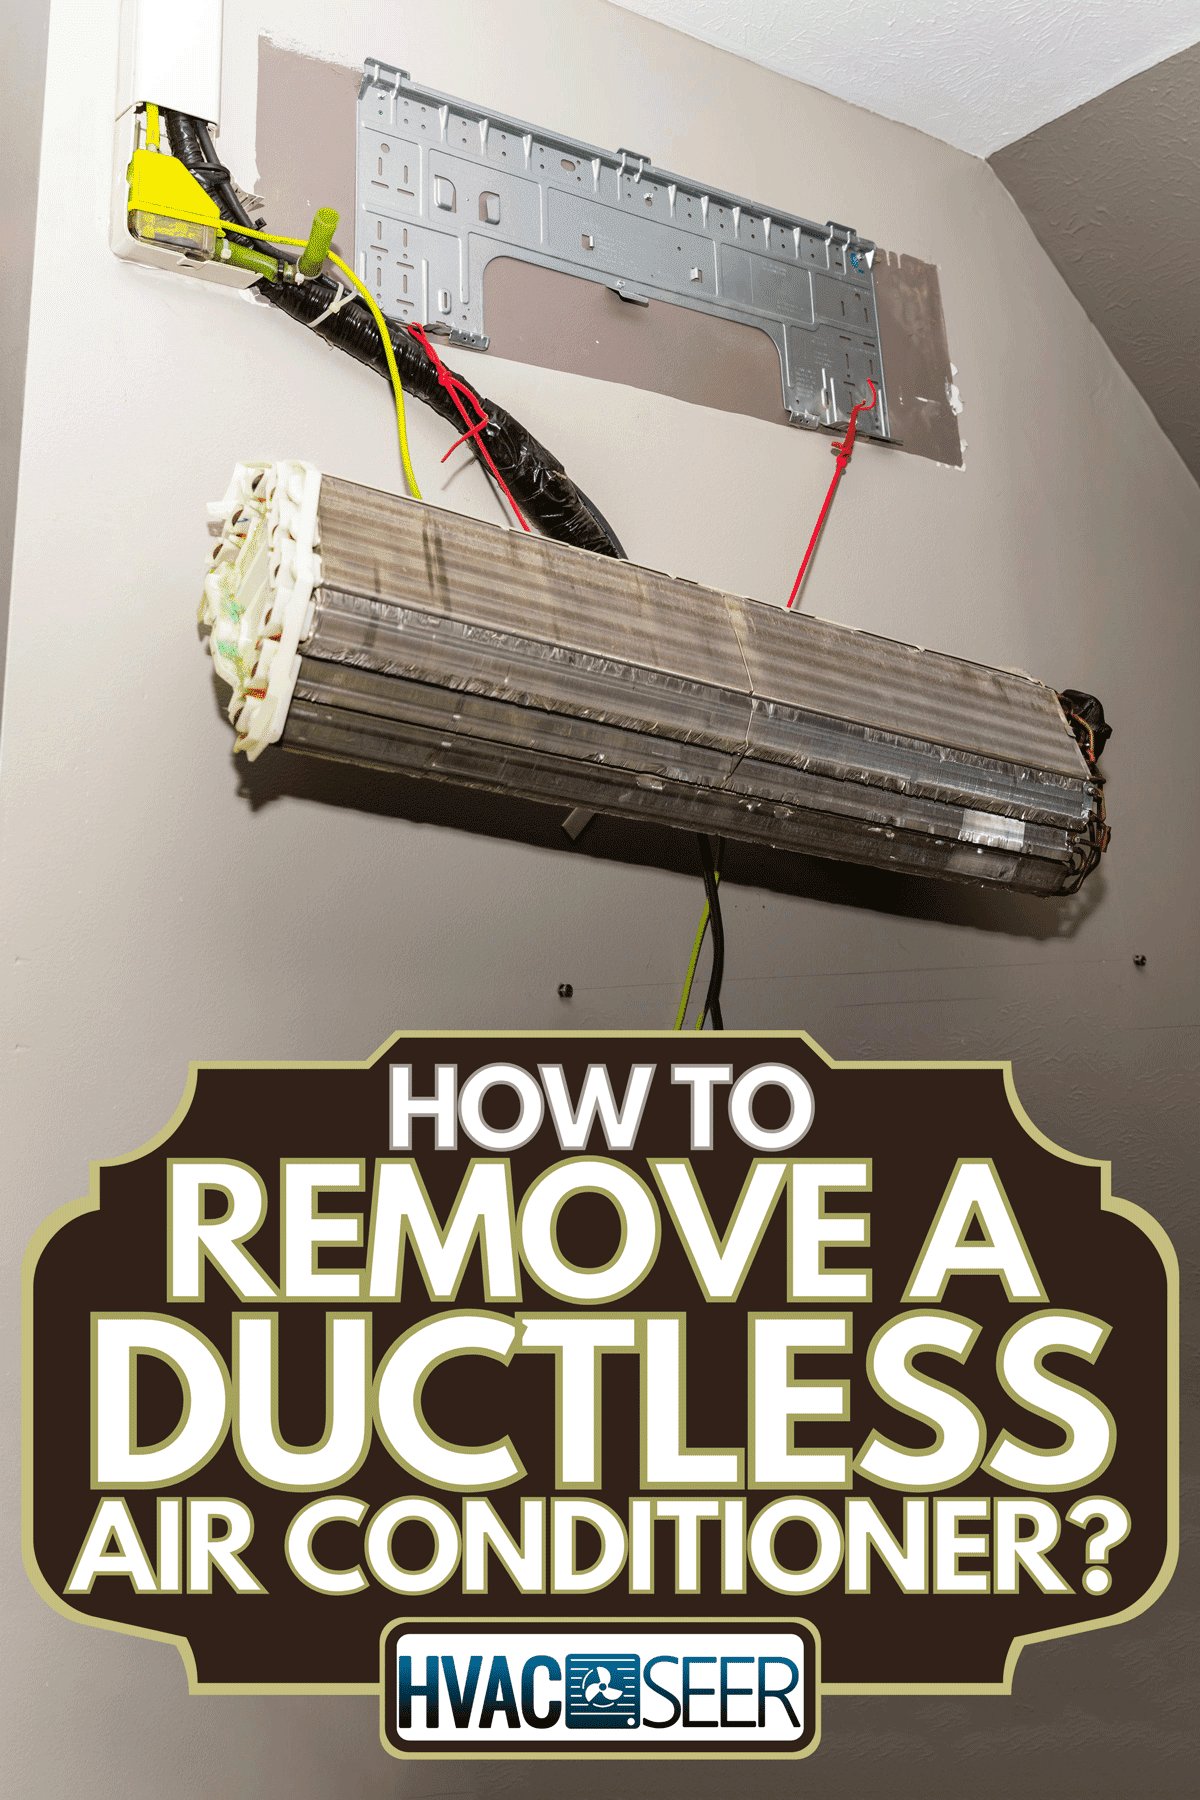 Ductless air conditioner system being remove from the wall for repair, How To Remove A Ductless Air Conditioner?